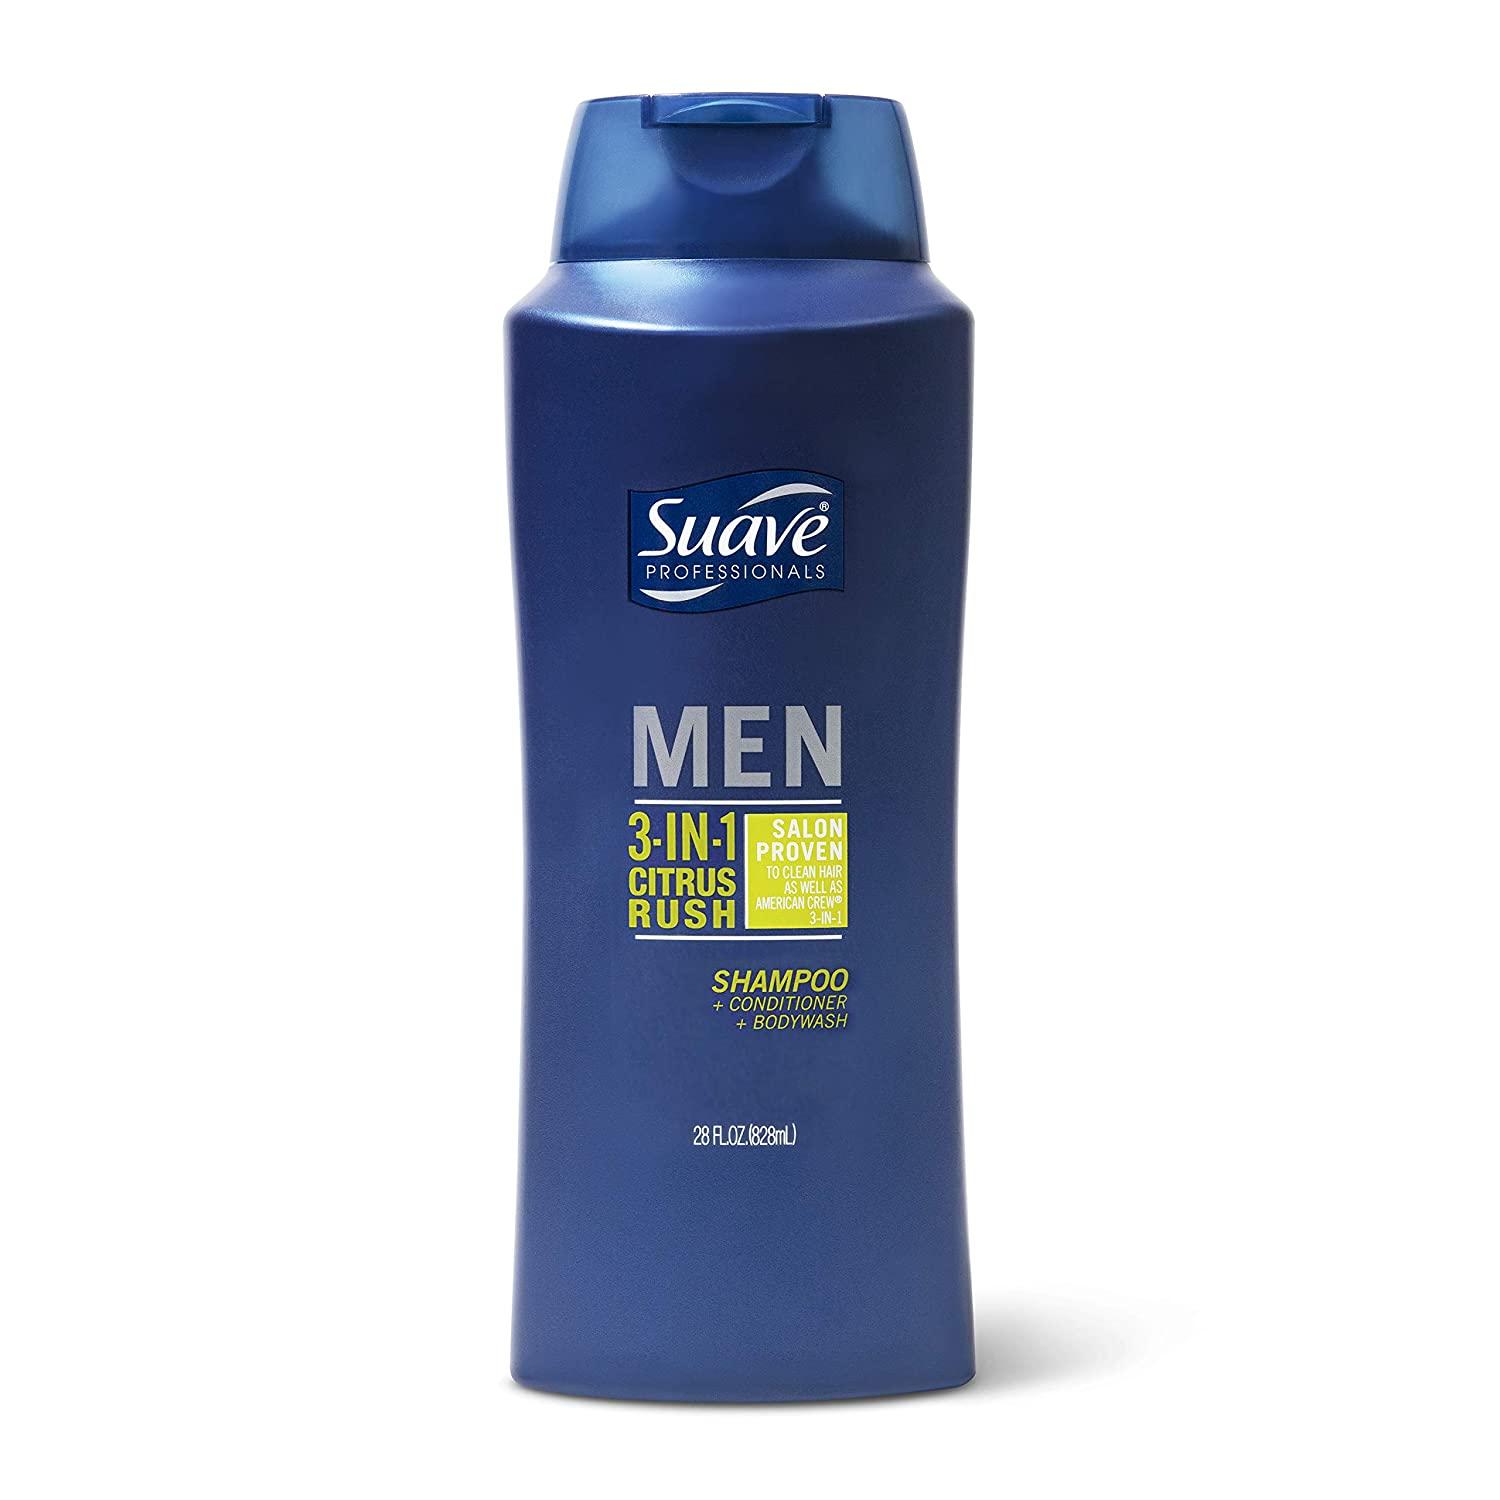 Suave Men 3-in-1 Shampoo Conditioner Body Wash for $1.84 Shipped